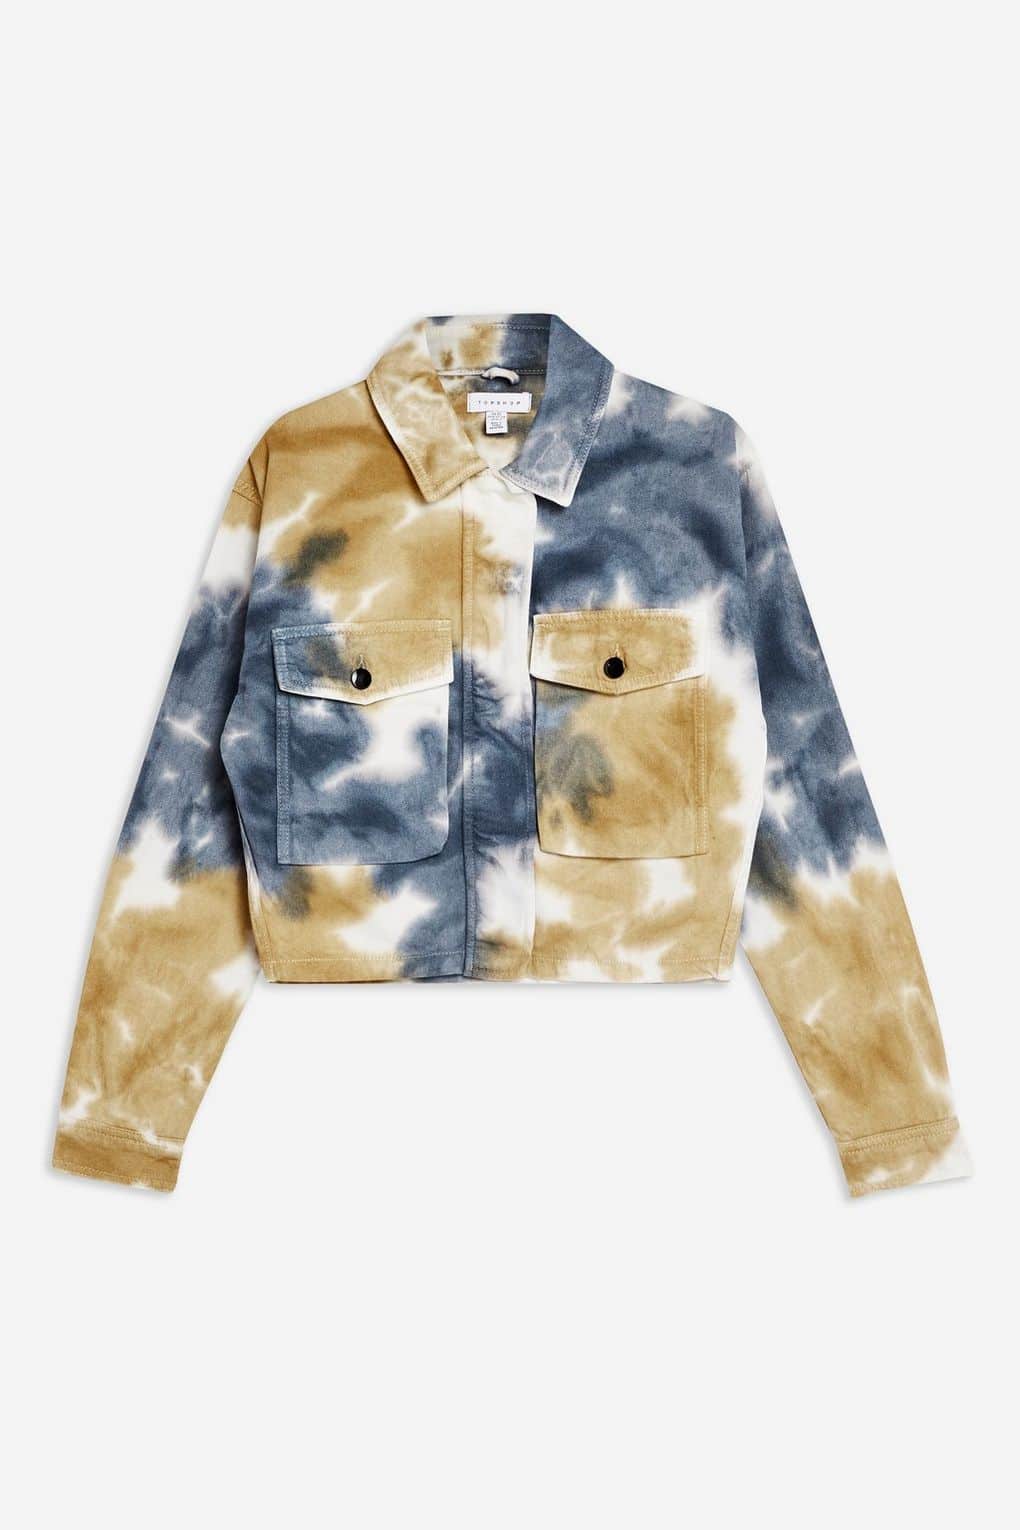 Tie-Dye Is Back And You Have To See These Chic Items To Believe It